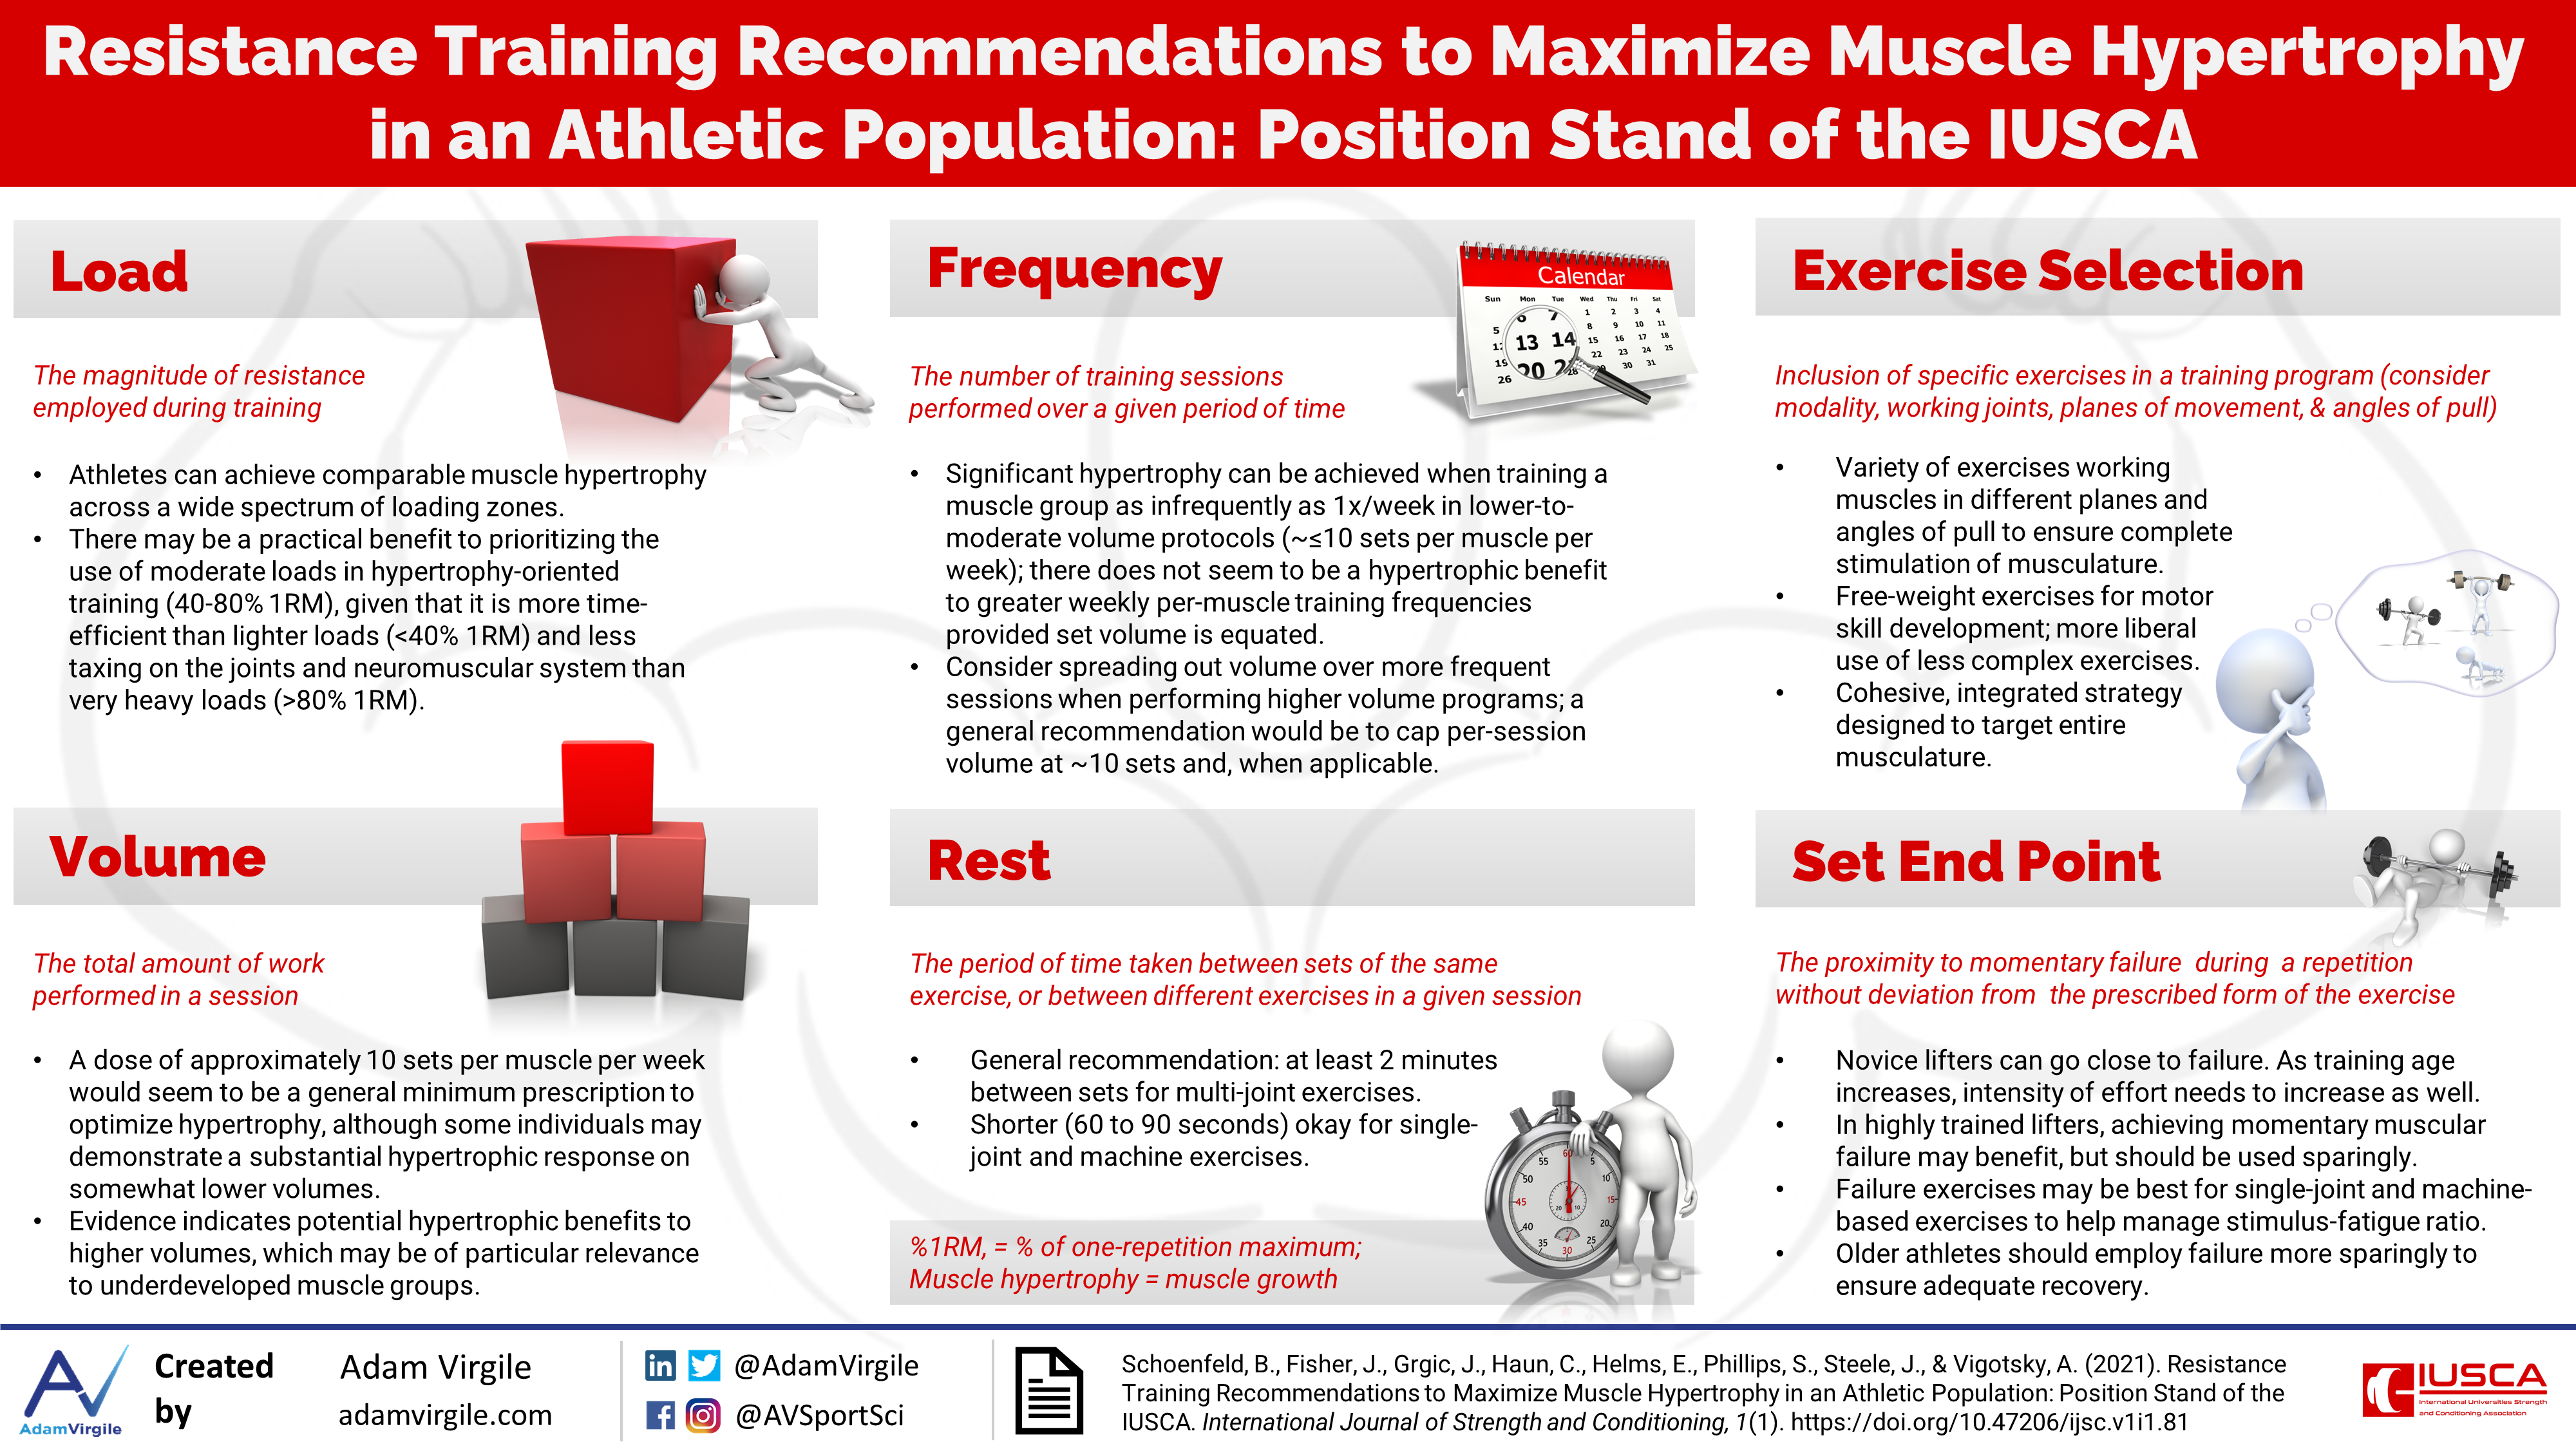 You are currently viewing Resistance Training Recommendations to Maximize Muscle Hypertrophy in an Athletic Population: Position Stand of the IUSCA